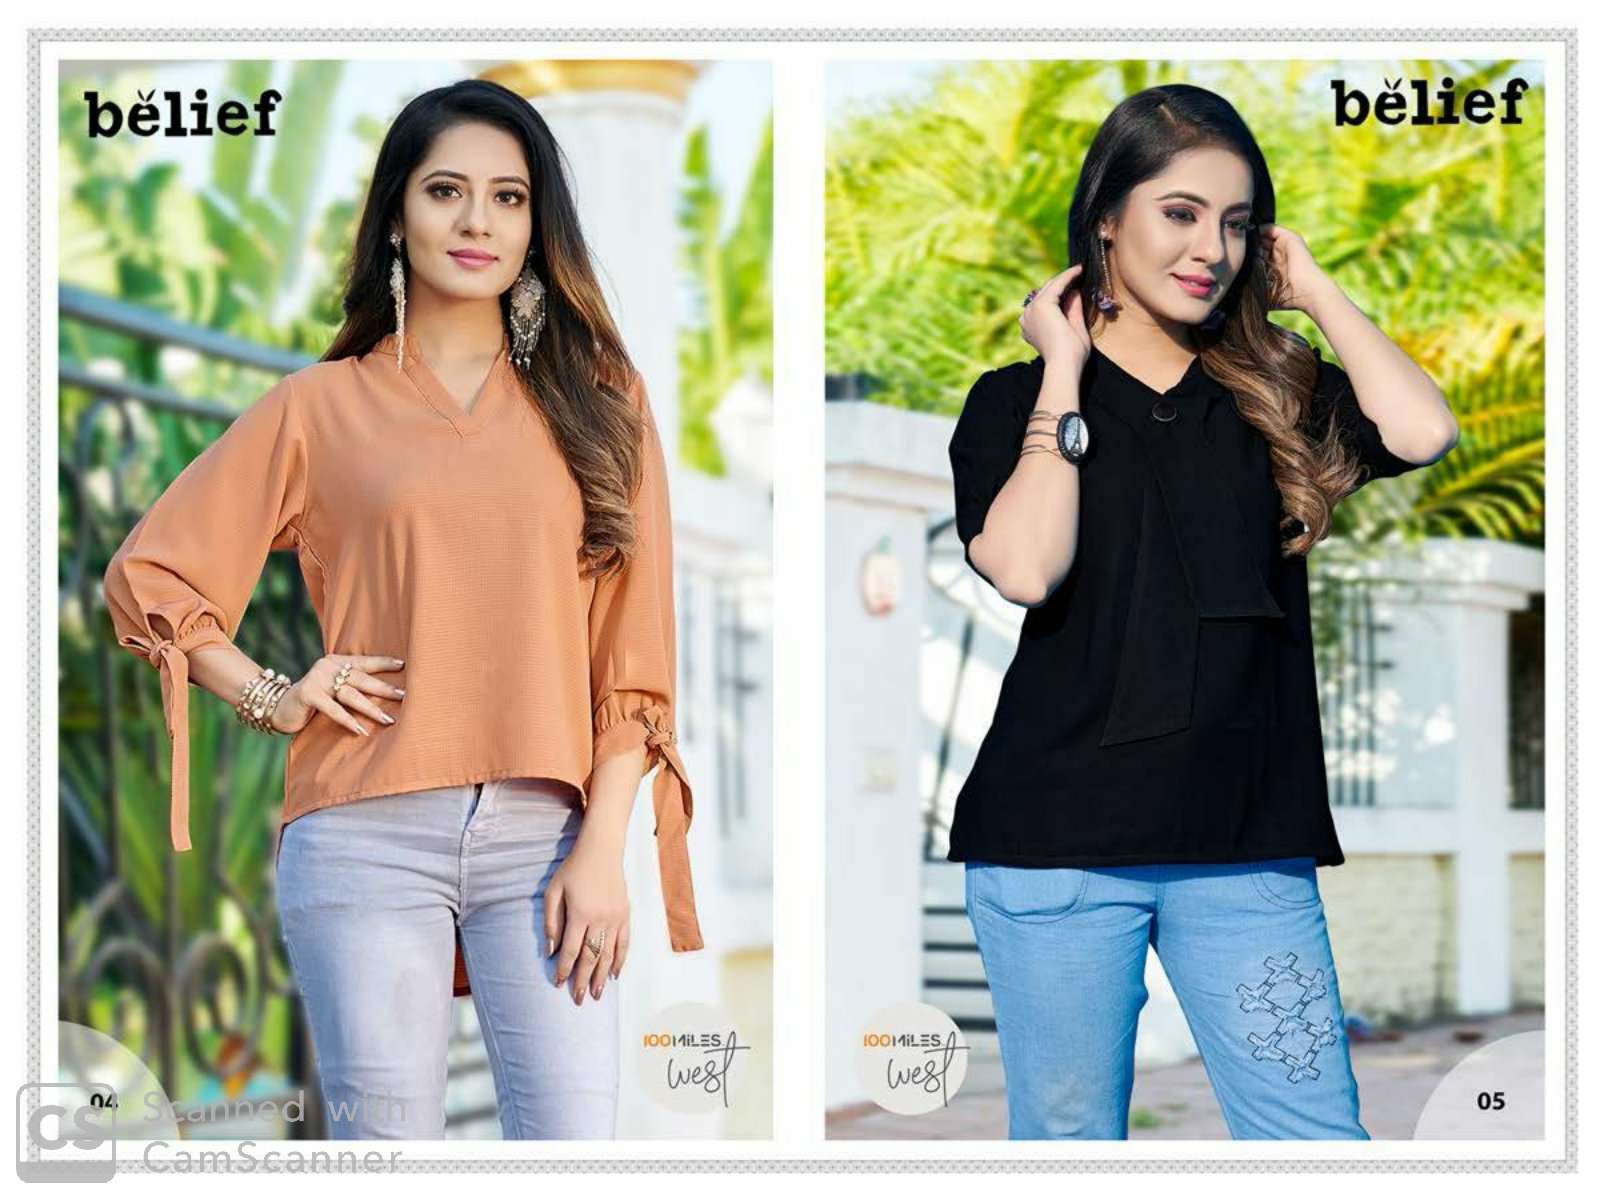 100 miles belief classy catchy look solid Western designer Tops in blended fabrics